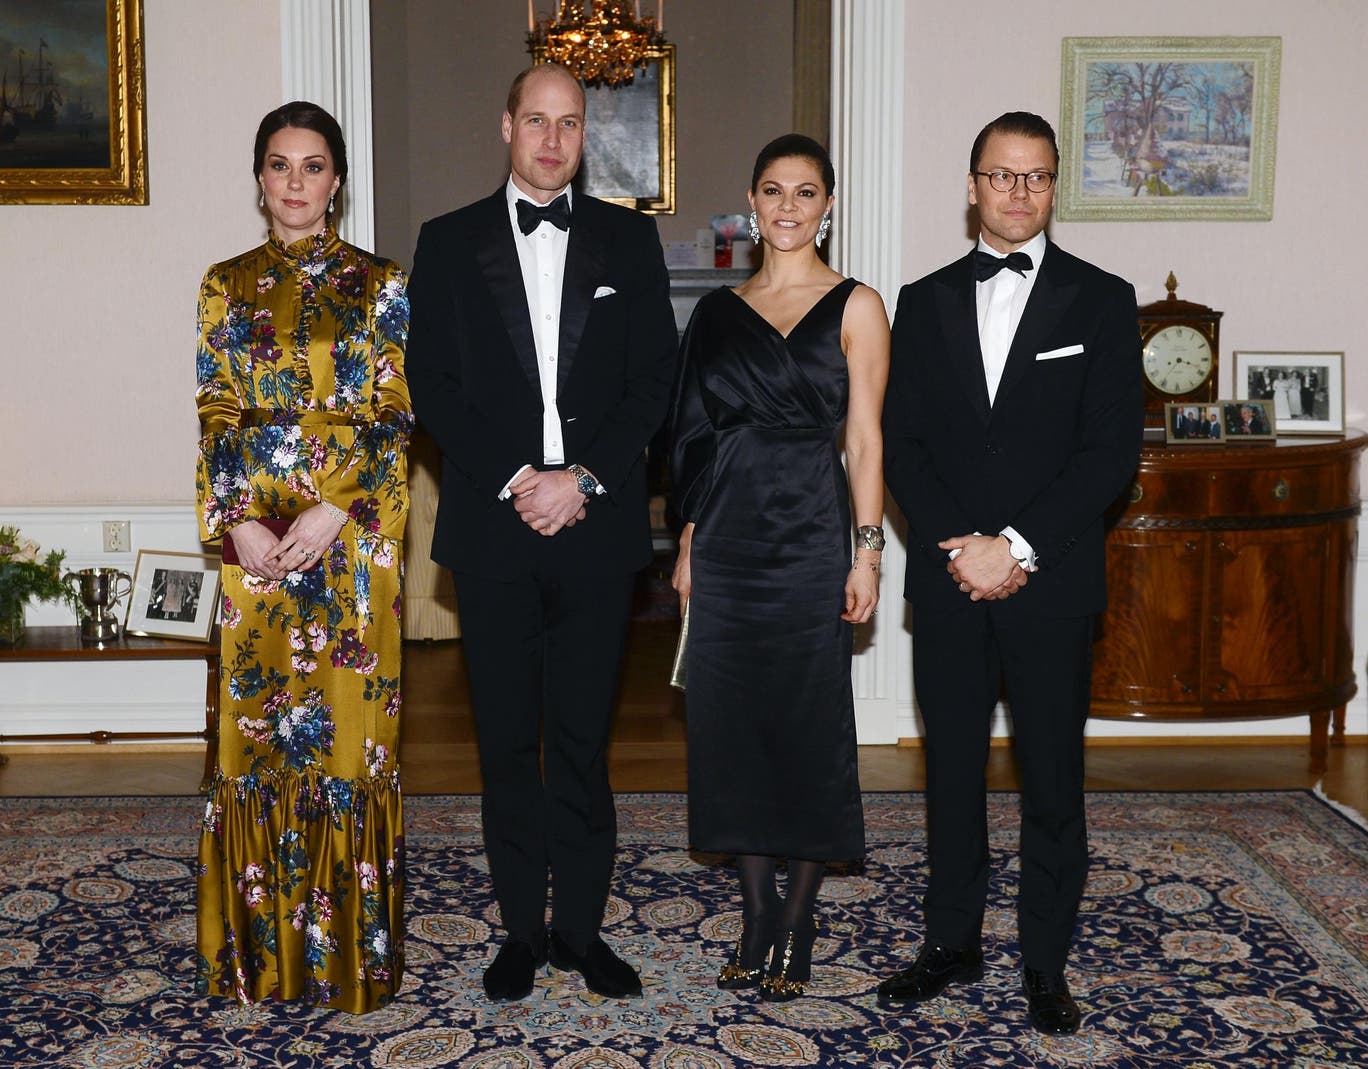 Kate wears mustard yellow and blue Erdem gown